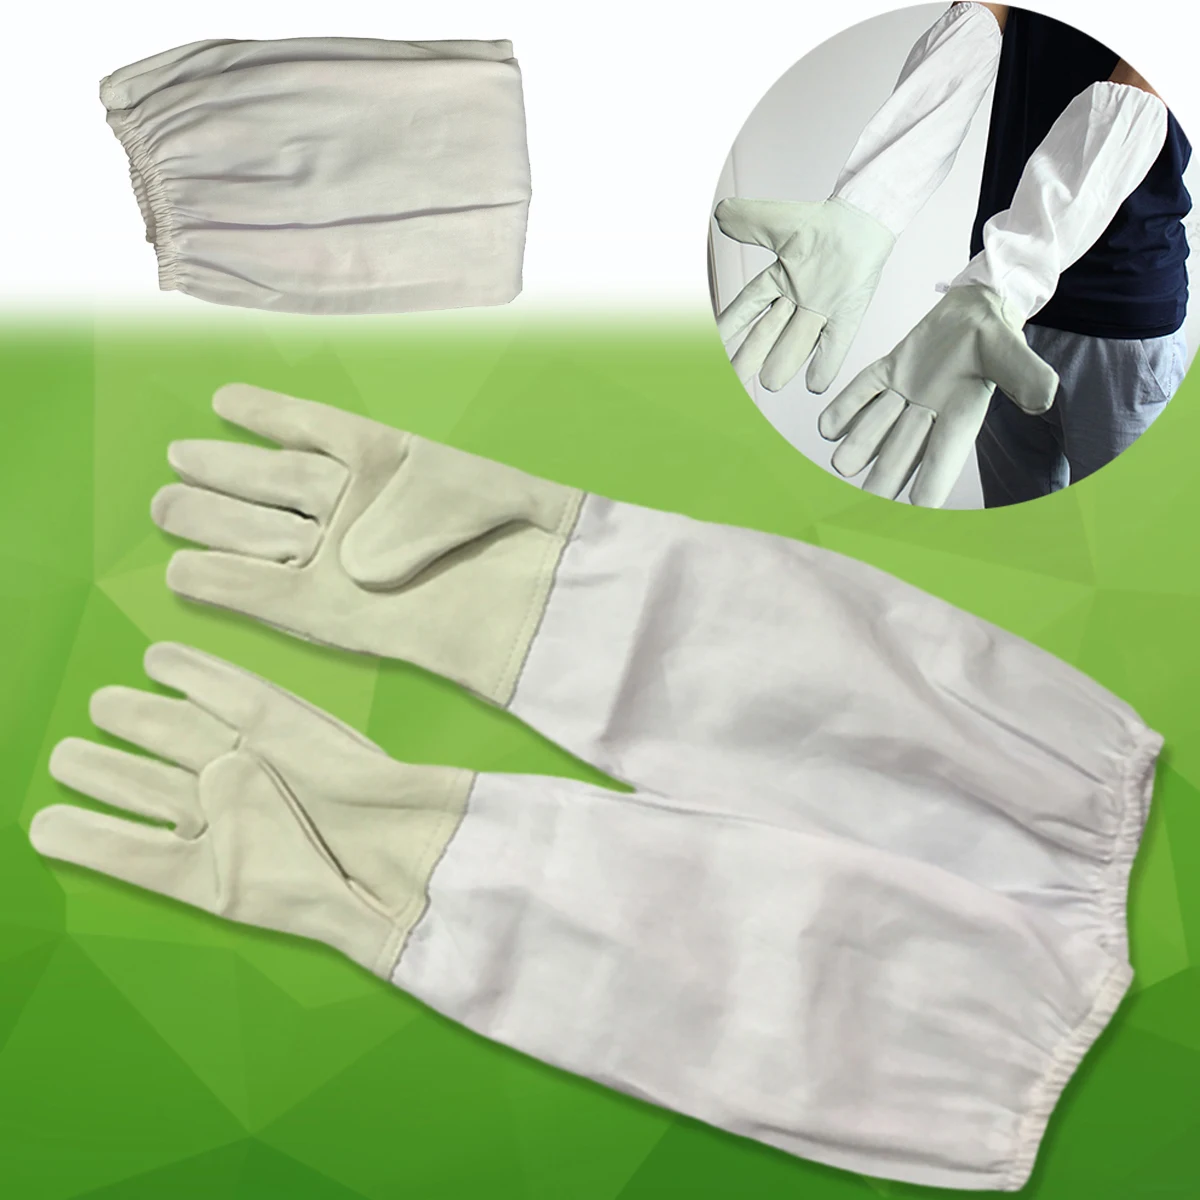 1 Pair of XL Large Protective Beekeeping Gloves With Vented Beekeeper Long Sleeves Professional Anti Bee Mayitr Goatskin Gloves